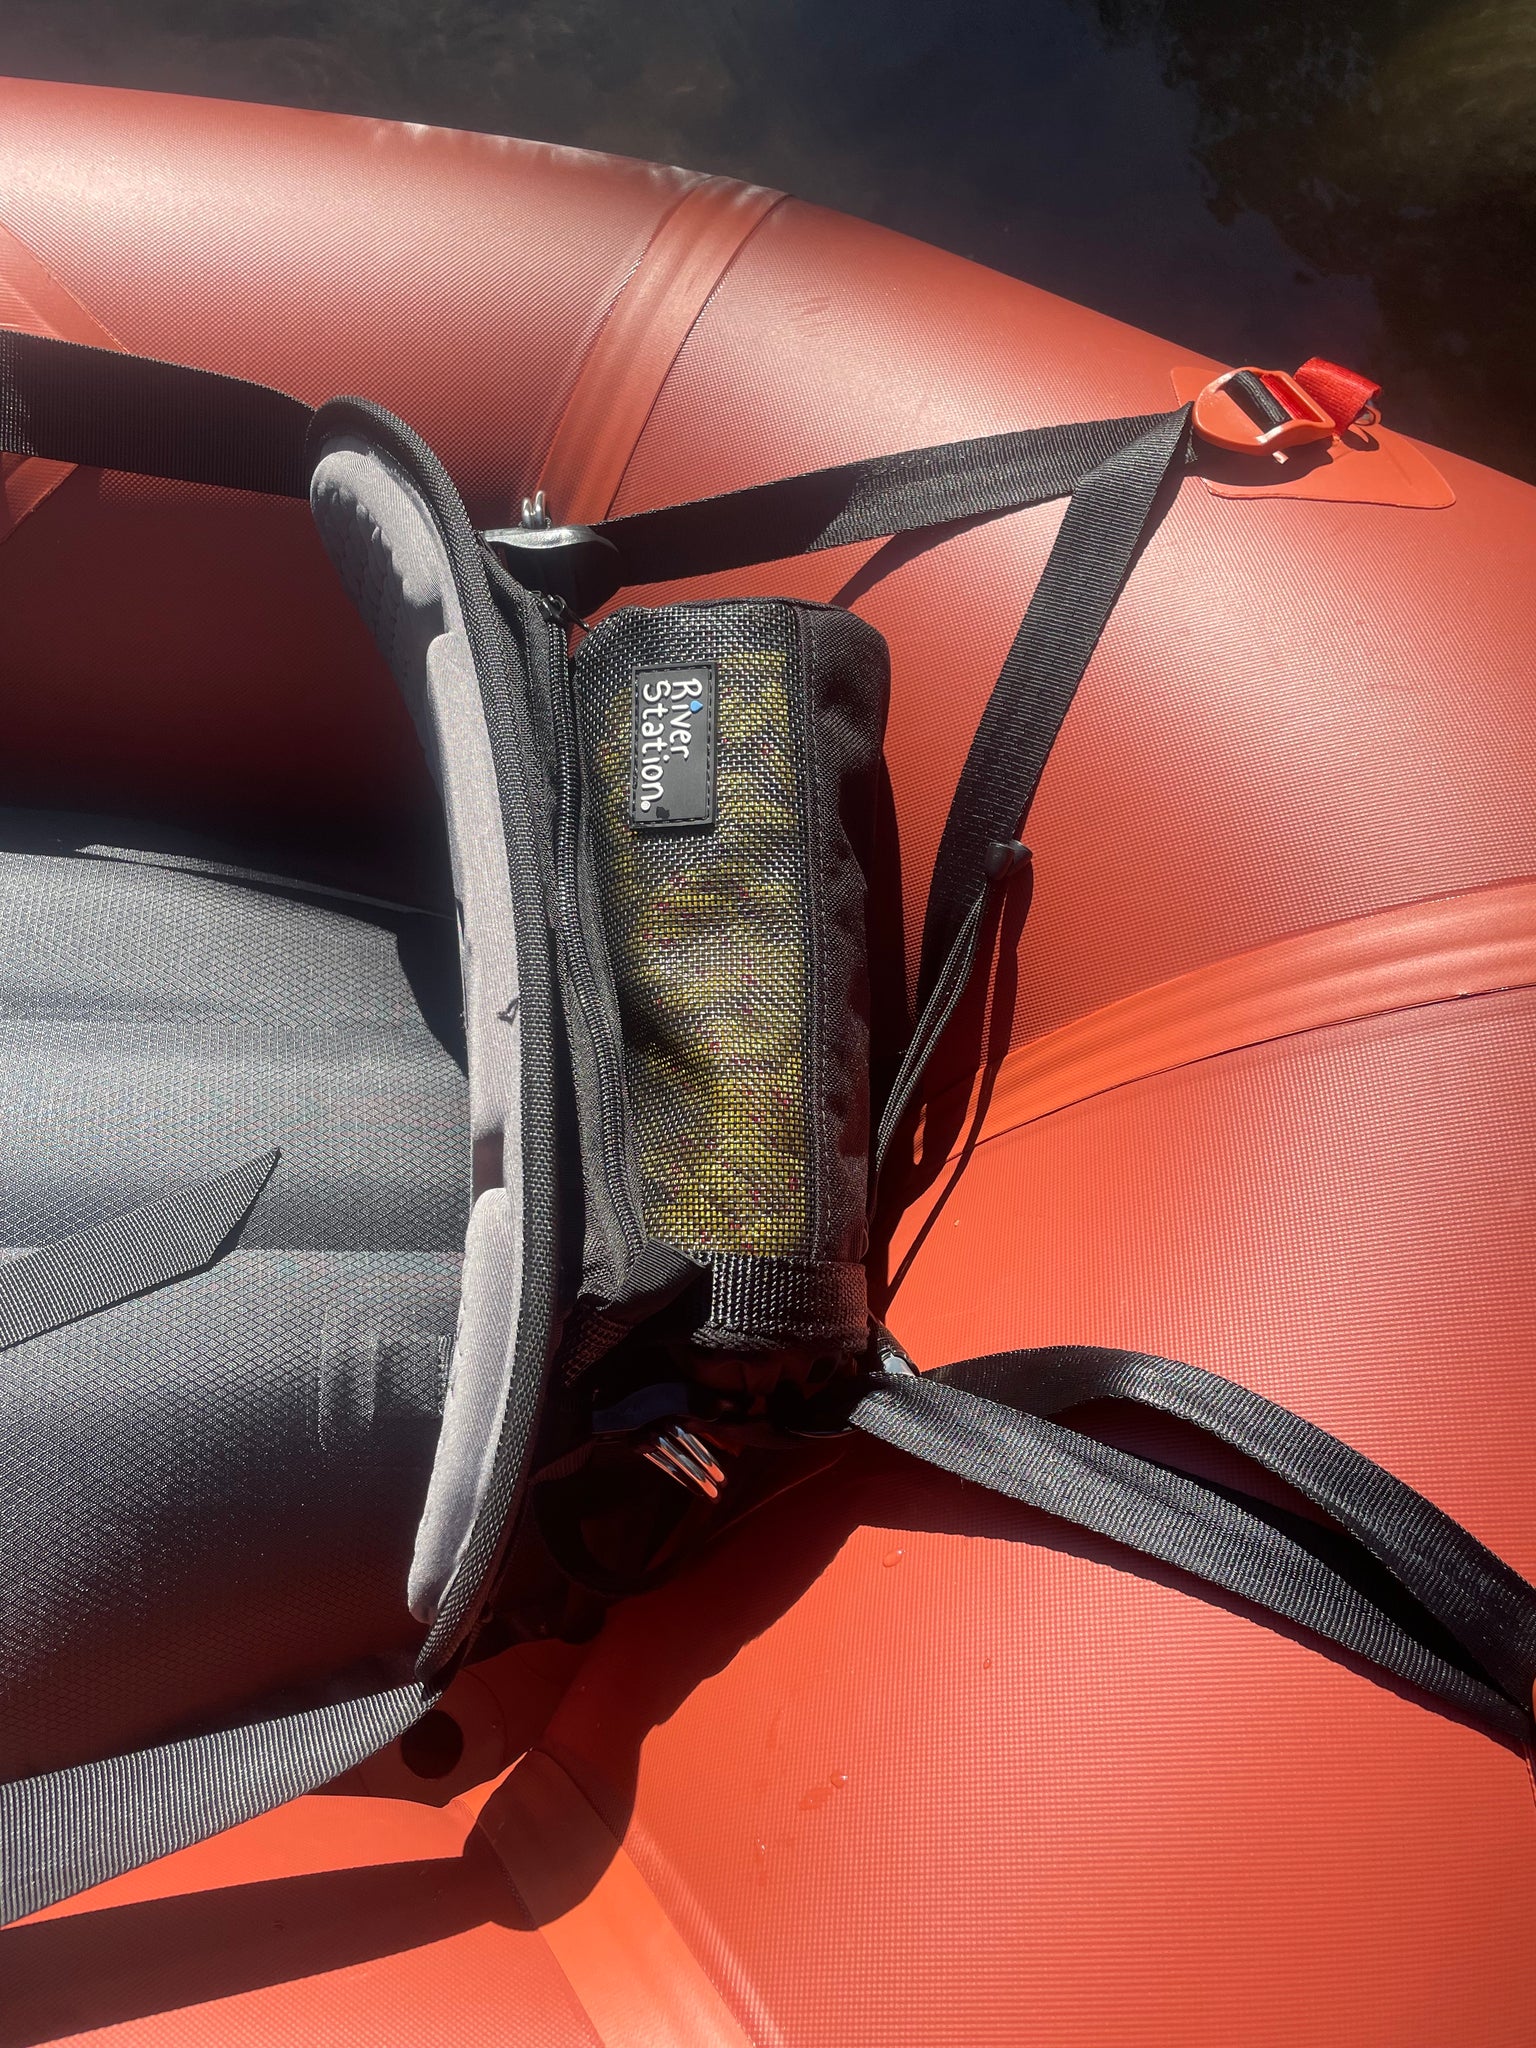 Packrafting Throwbag and Throw bag and throw rope by River Station Gear